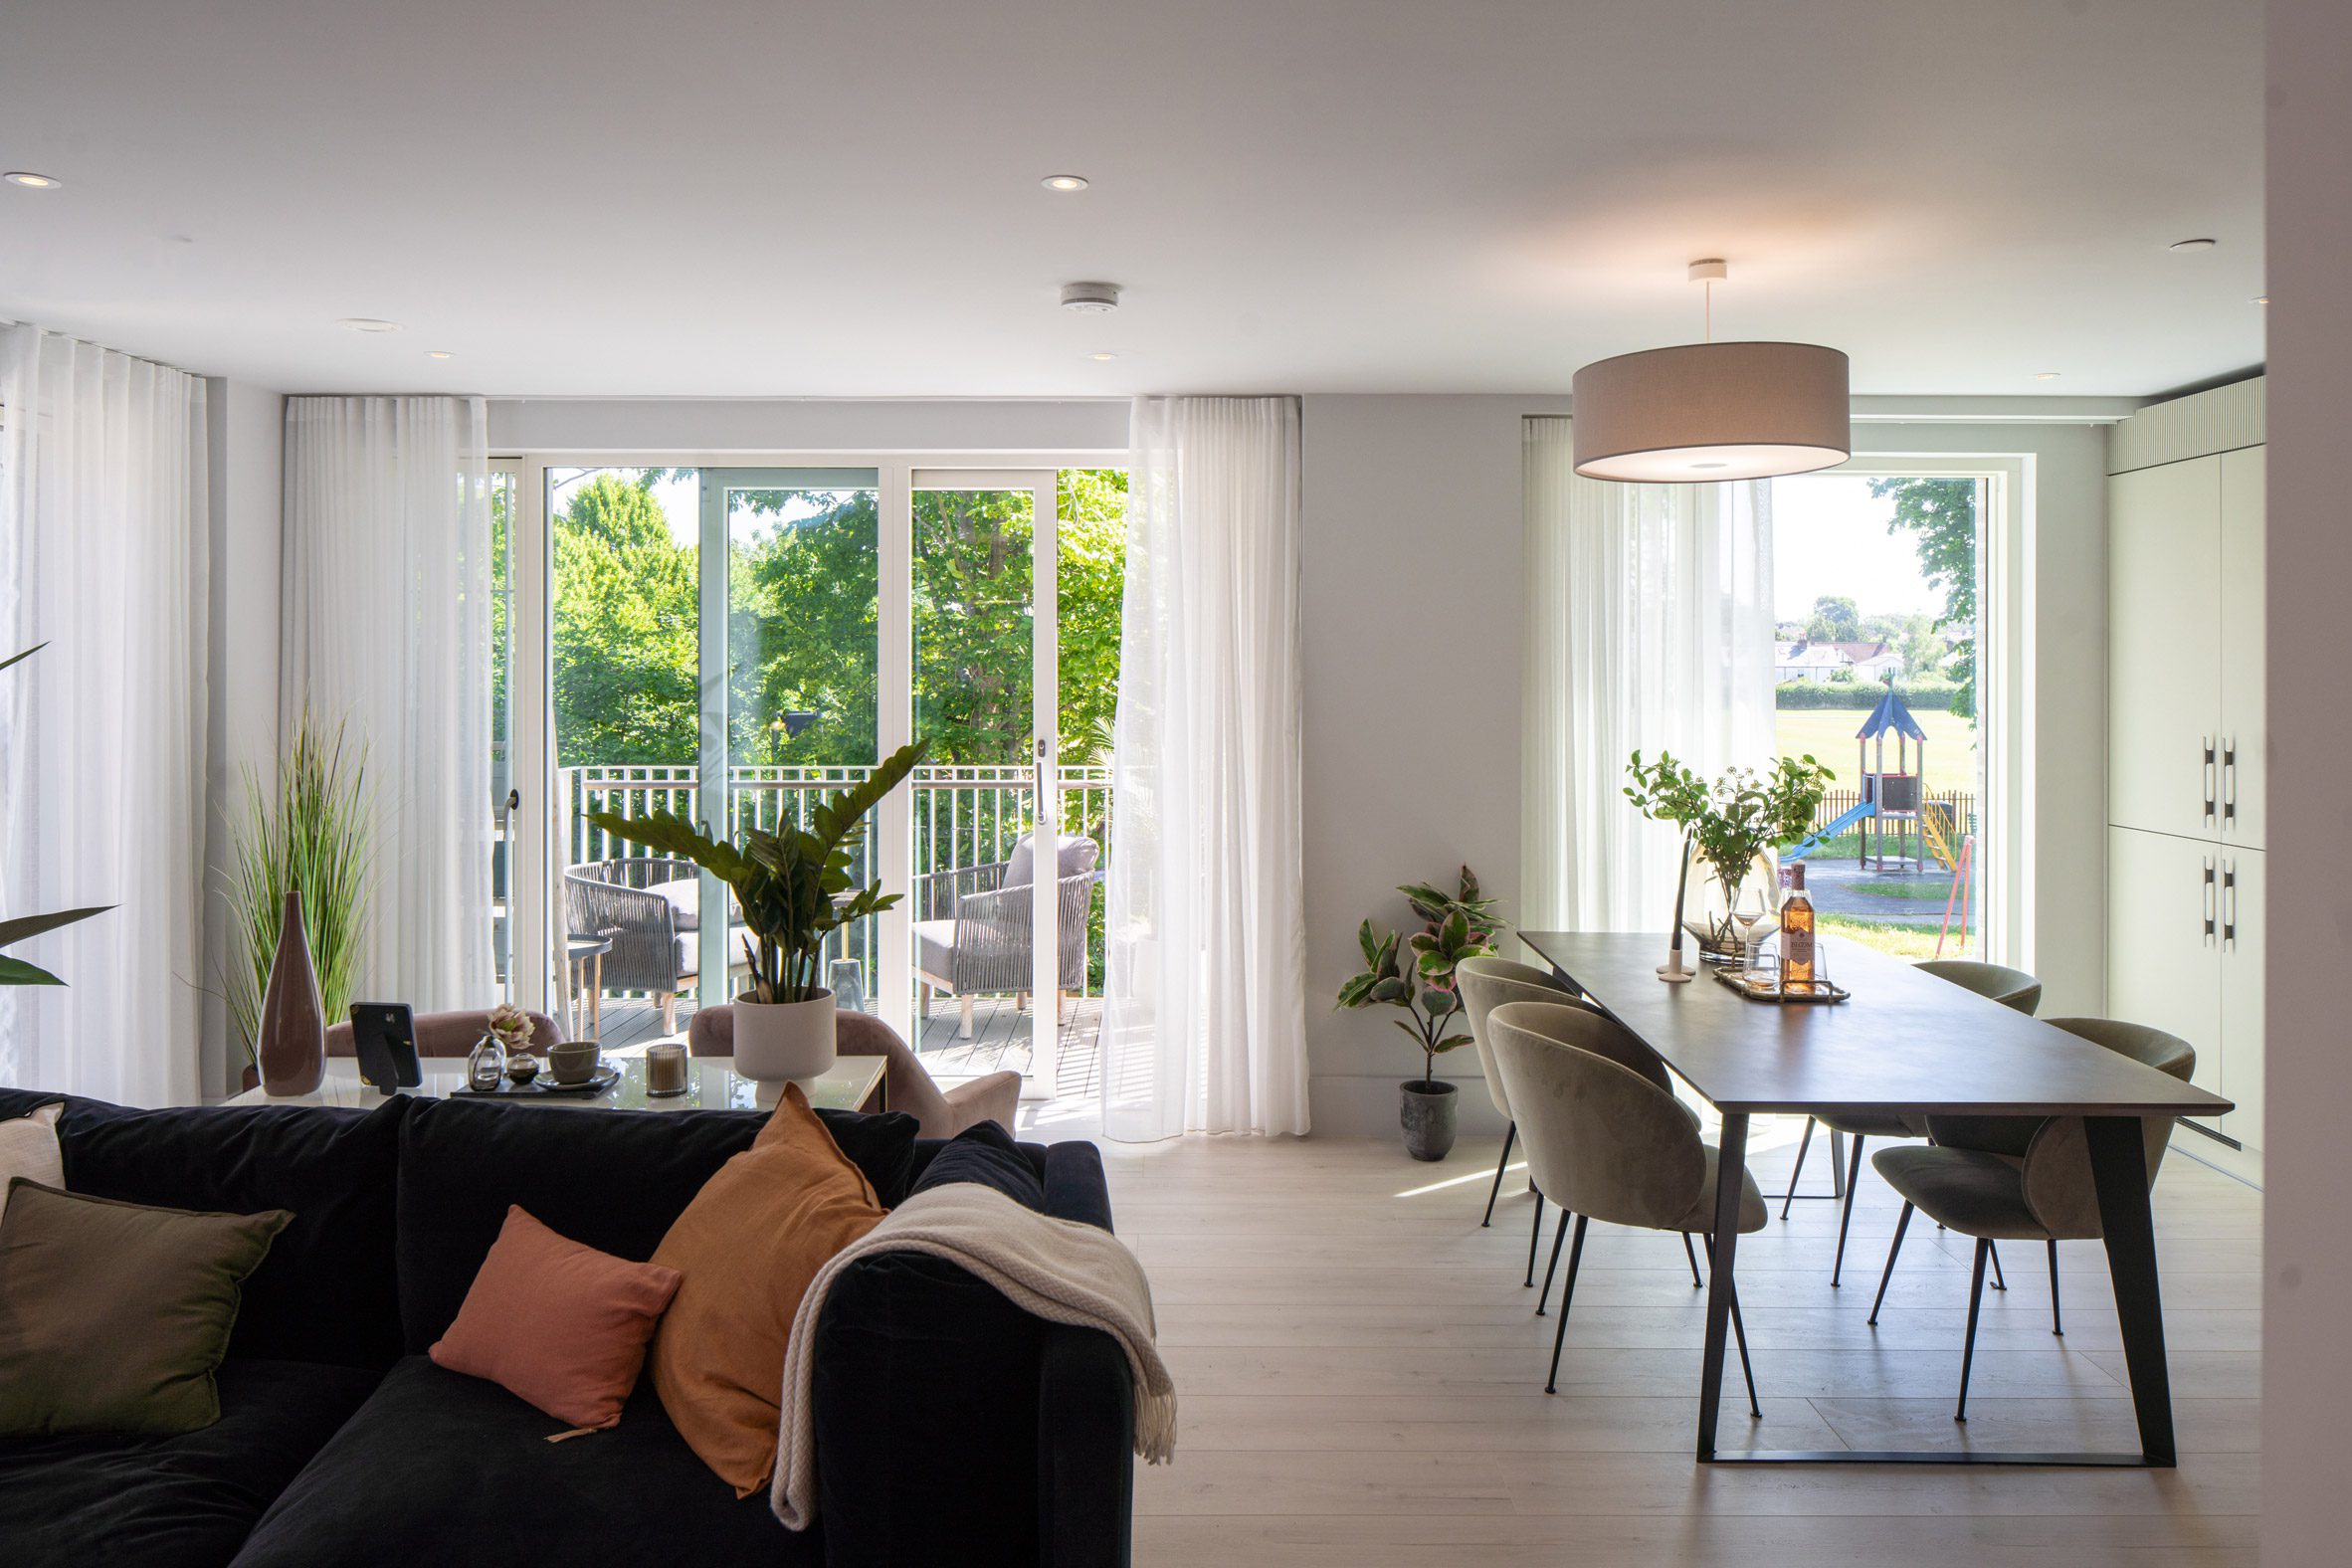 Interior living area Cobham Bowers retirement housing in Surrey by Coffey Architects